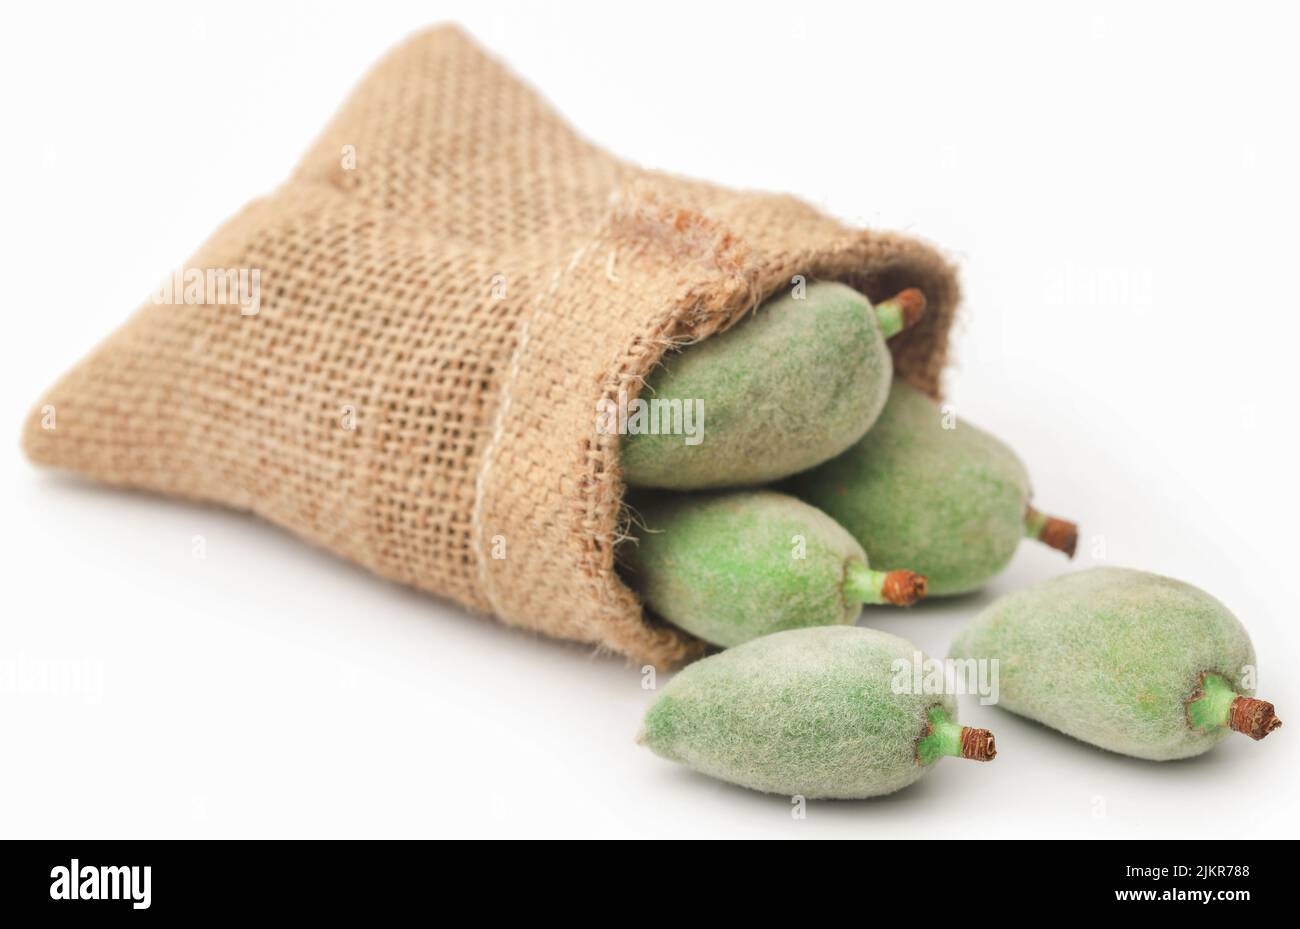 Green almond in jute sac over white background Stock Photo